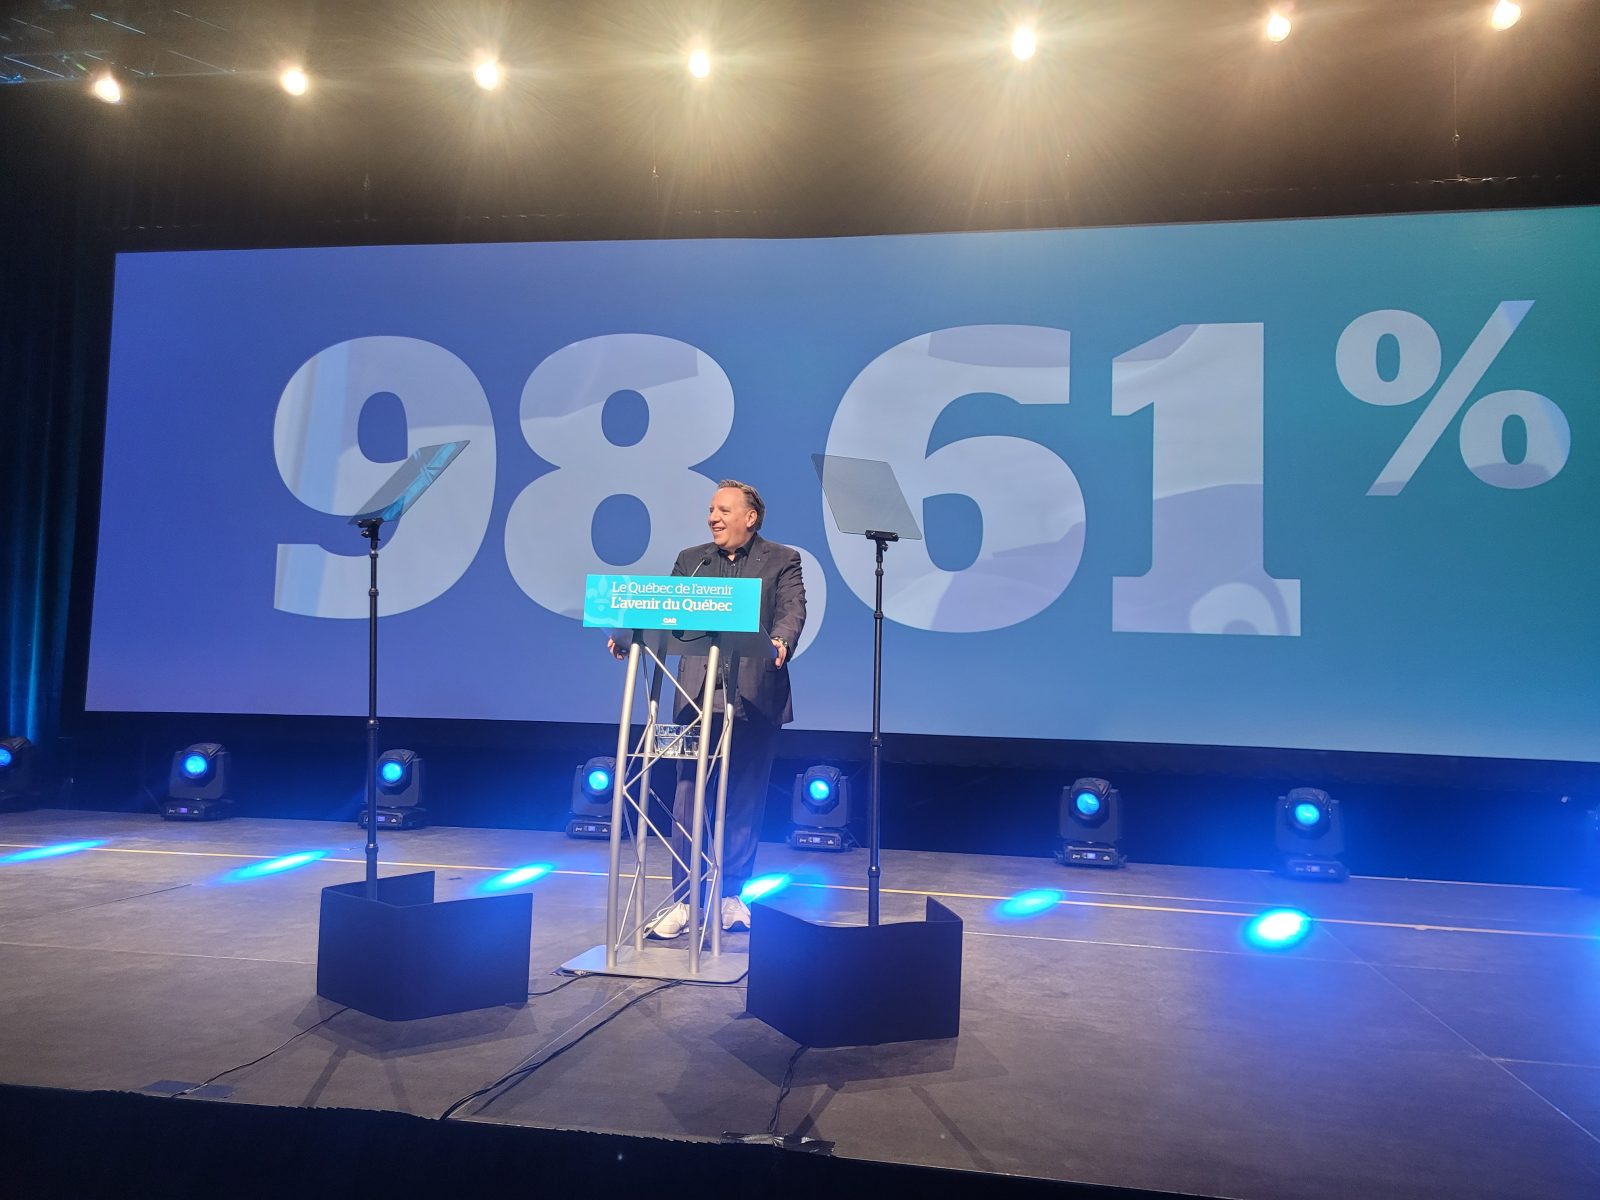 Legault receives 98.6% support at CAQ party convention in Sherbrooke